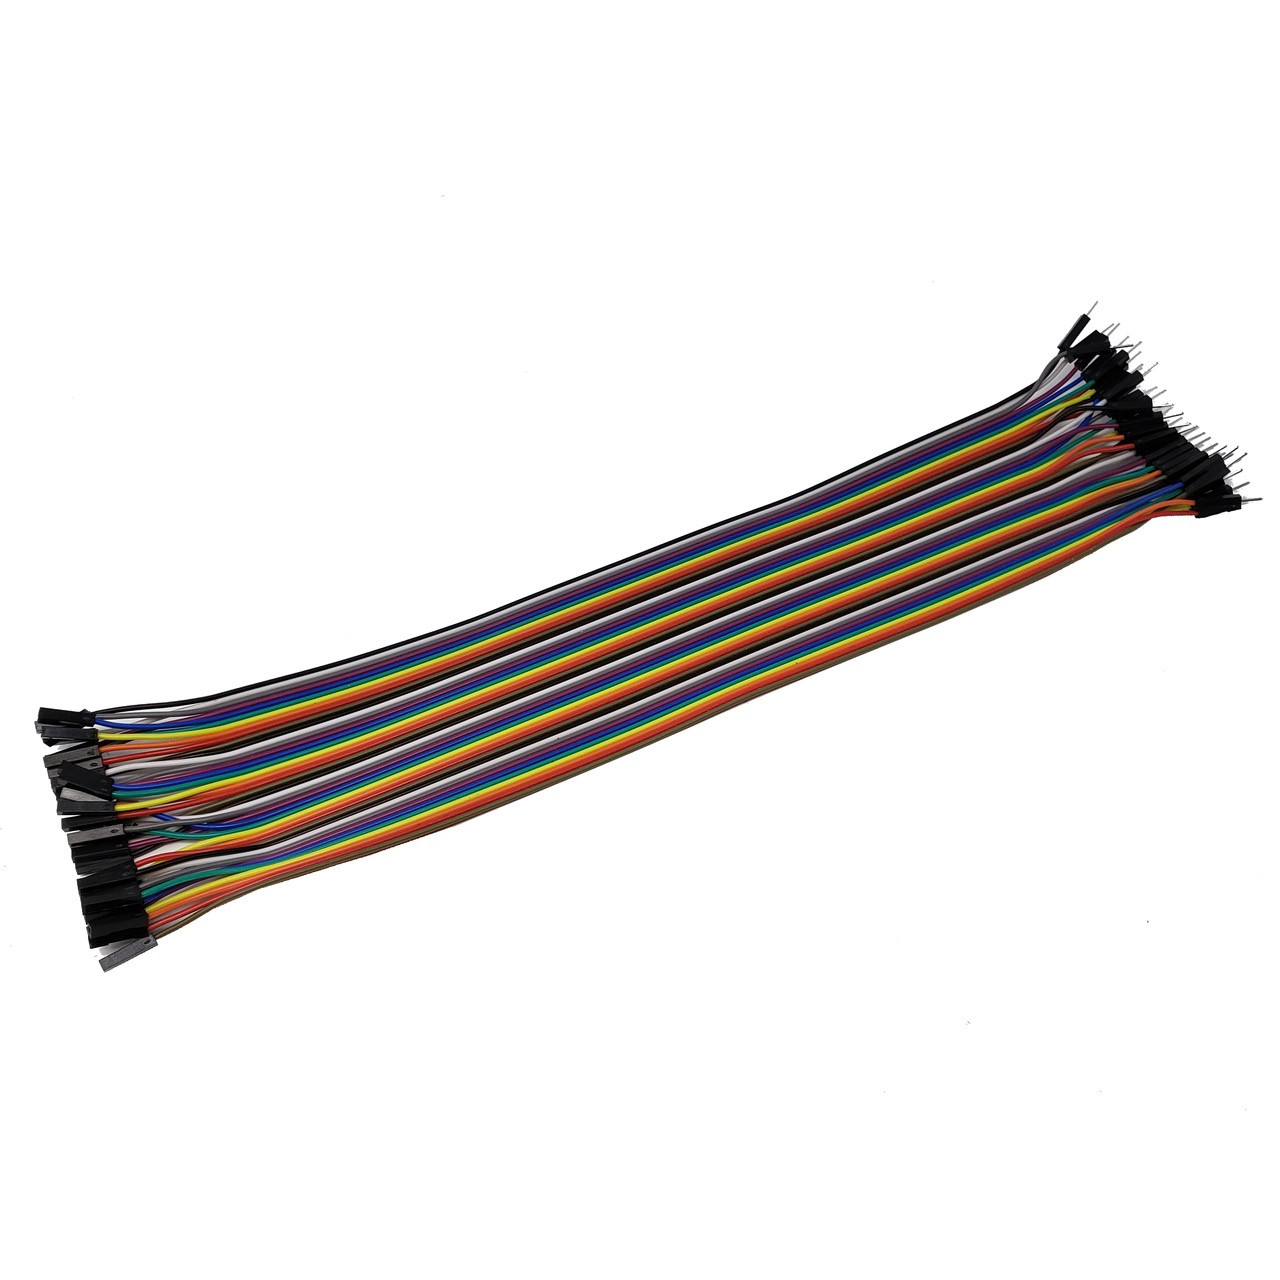 60cm - 40 Pin Ribbon Cable w/Dupont Connectors (Male to Female)